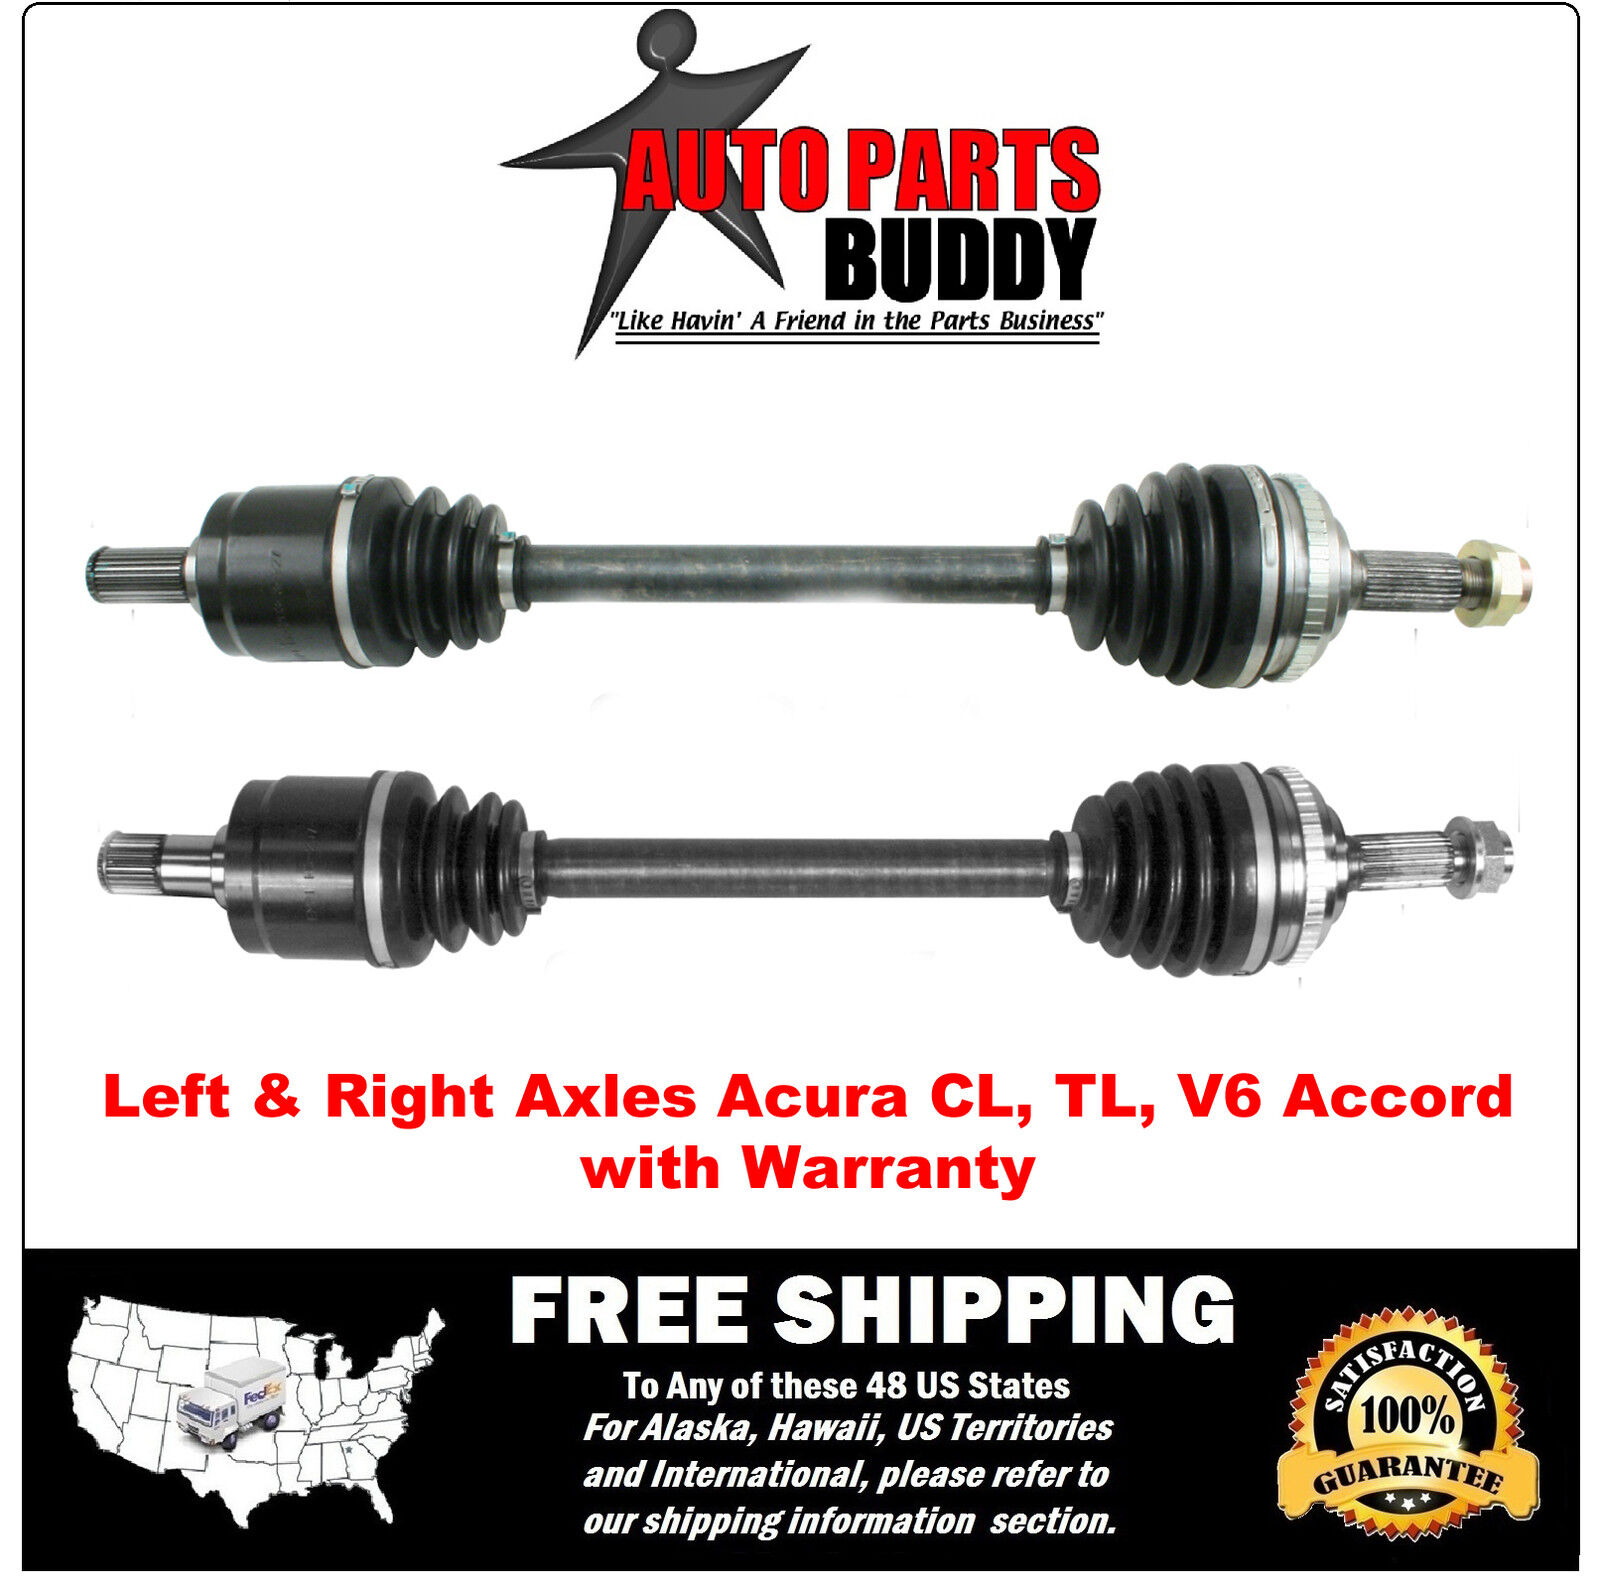 2 New Front CV Axles V6 Accord, 3.2L CL, 3.2L TL With 2 Year Warranty